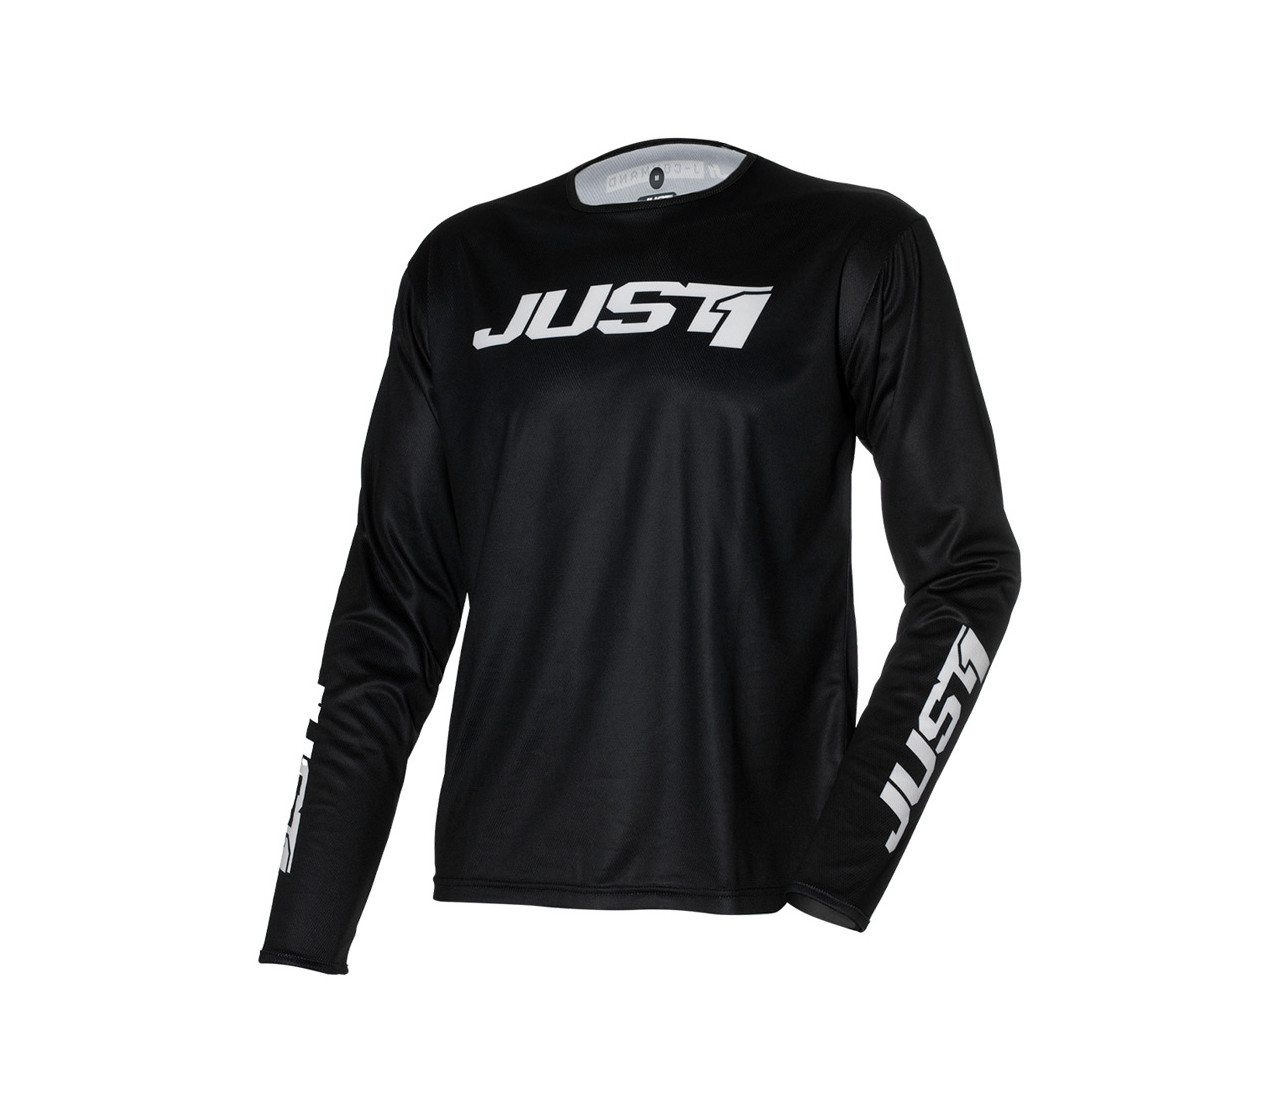 JUST1 JERSEY J-COMMAND SOLID BLACK